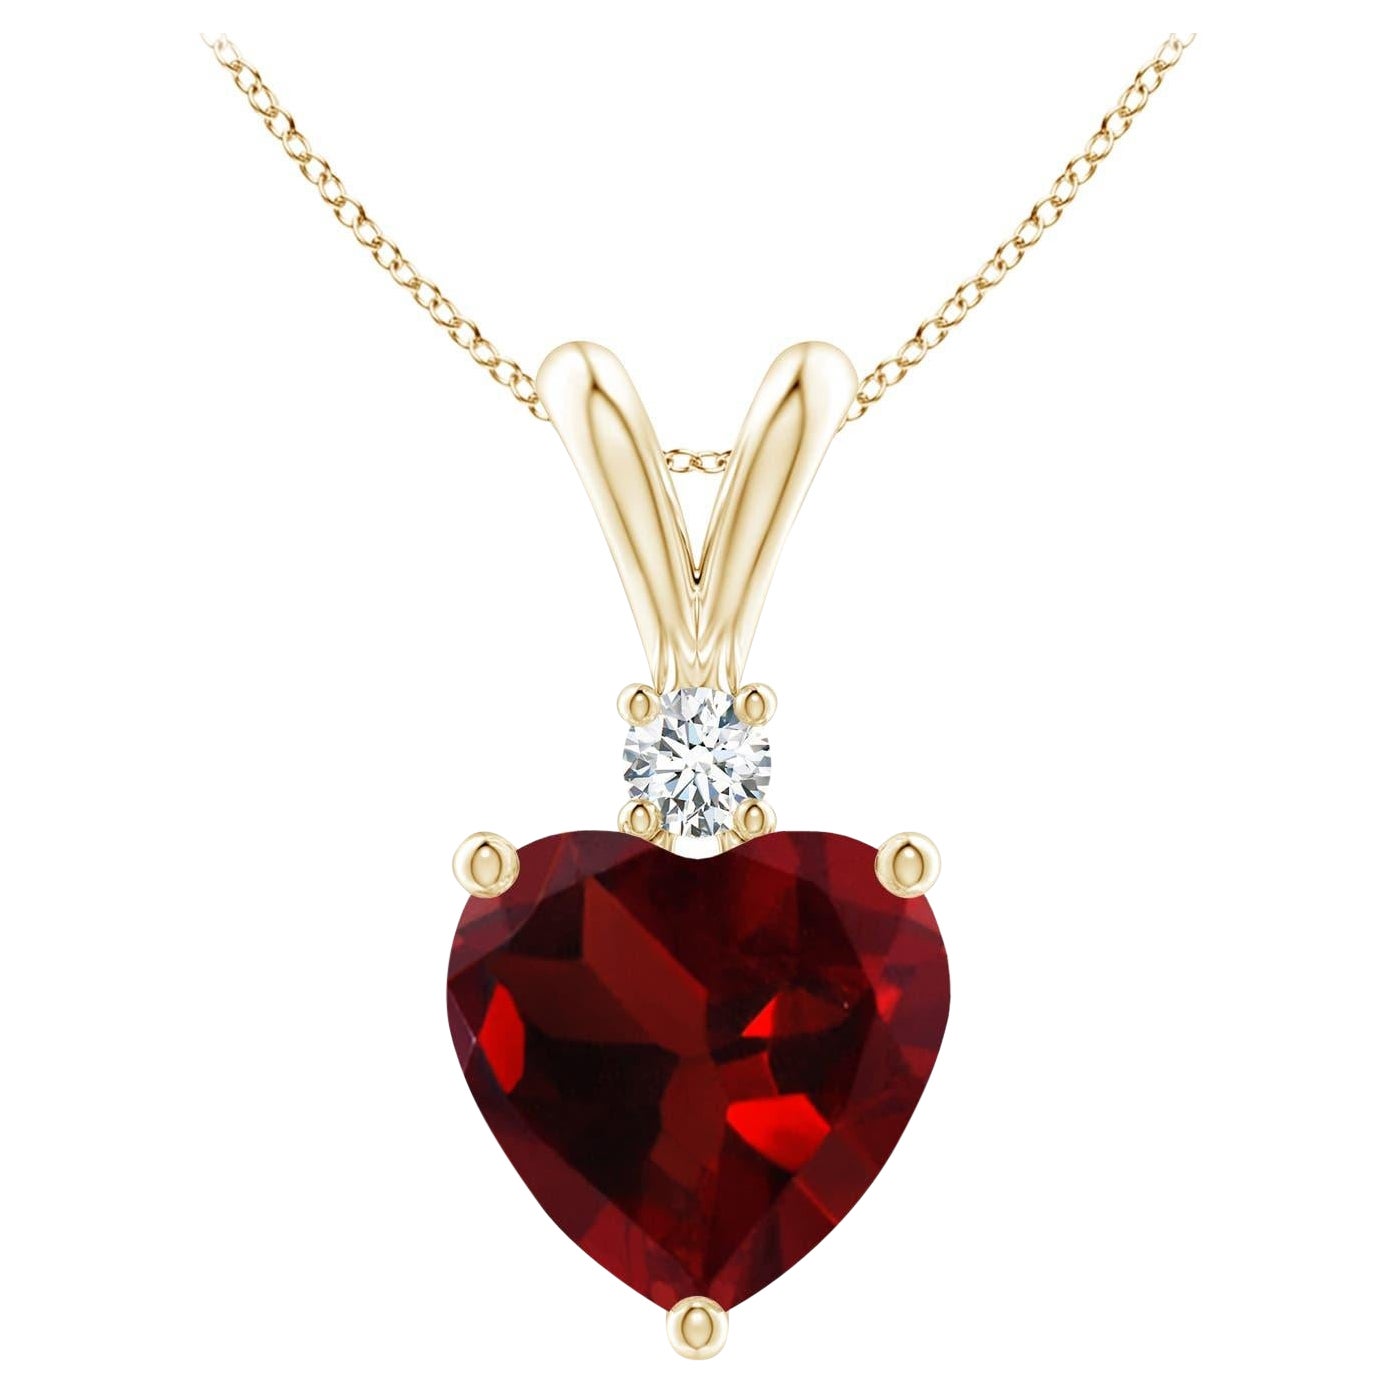 Natural Heart-Shaped 1.85ct Garnet Pendant with Diamond in 14ct Yellow Gold